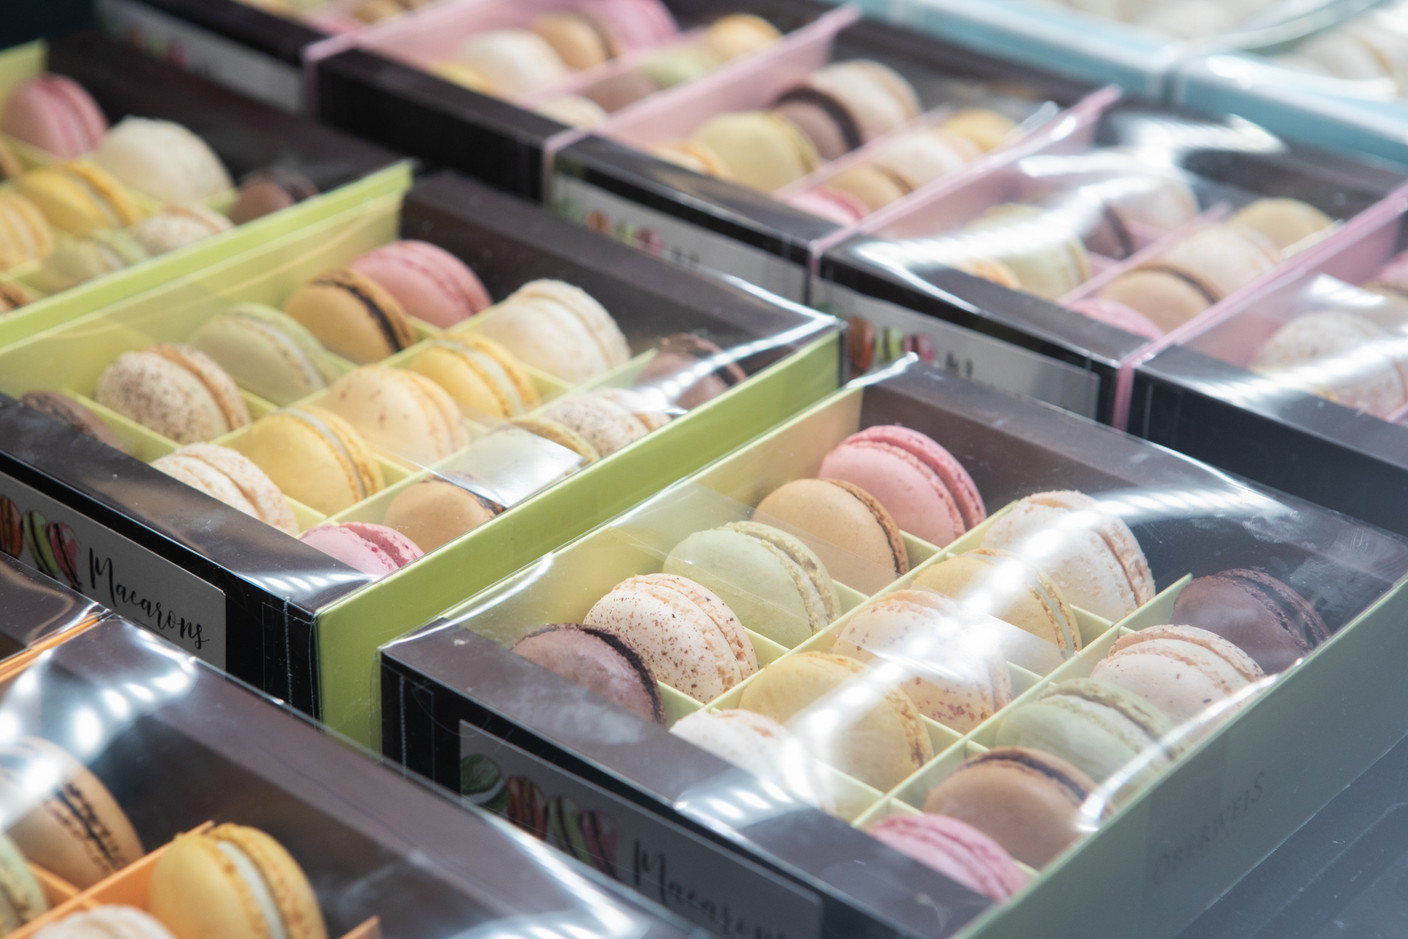 Macaroons are among the most popular products in the Trier shop. Photo: Matic Zorman / Maison Moderne